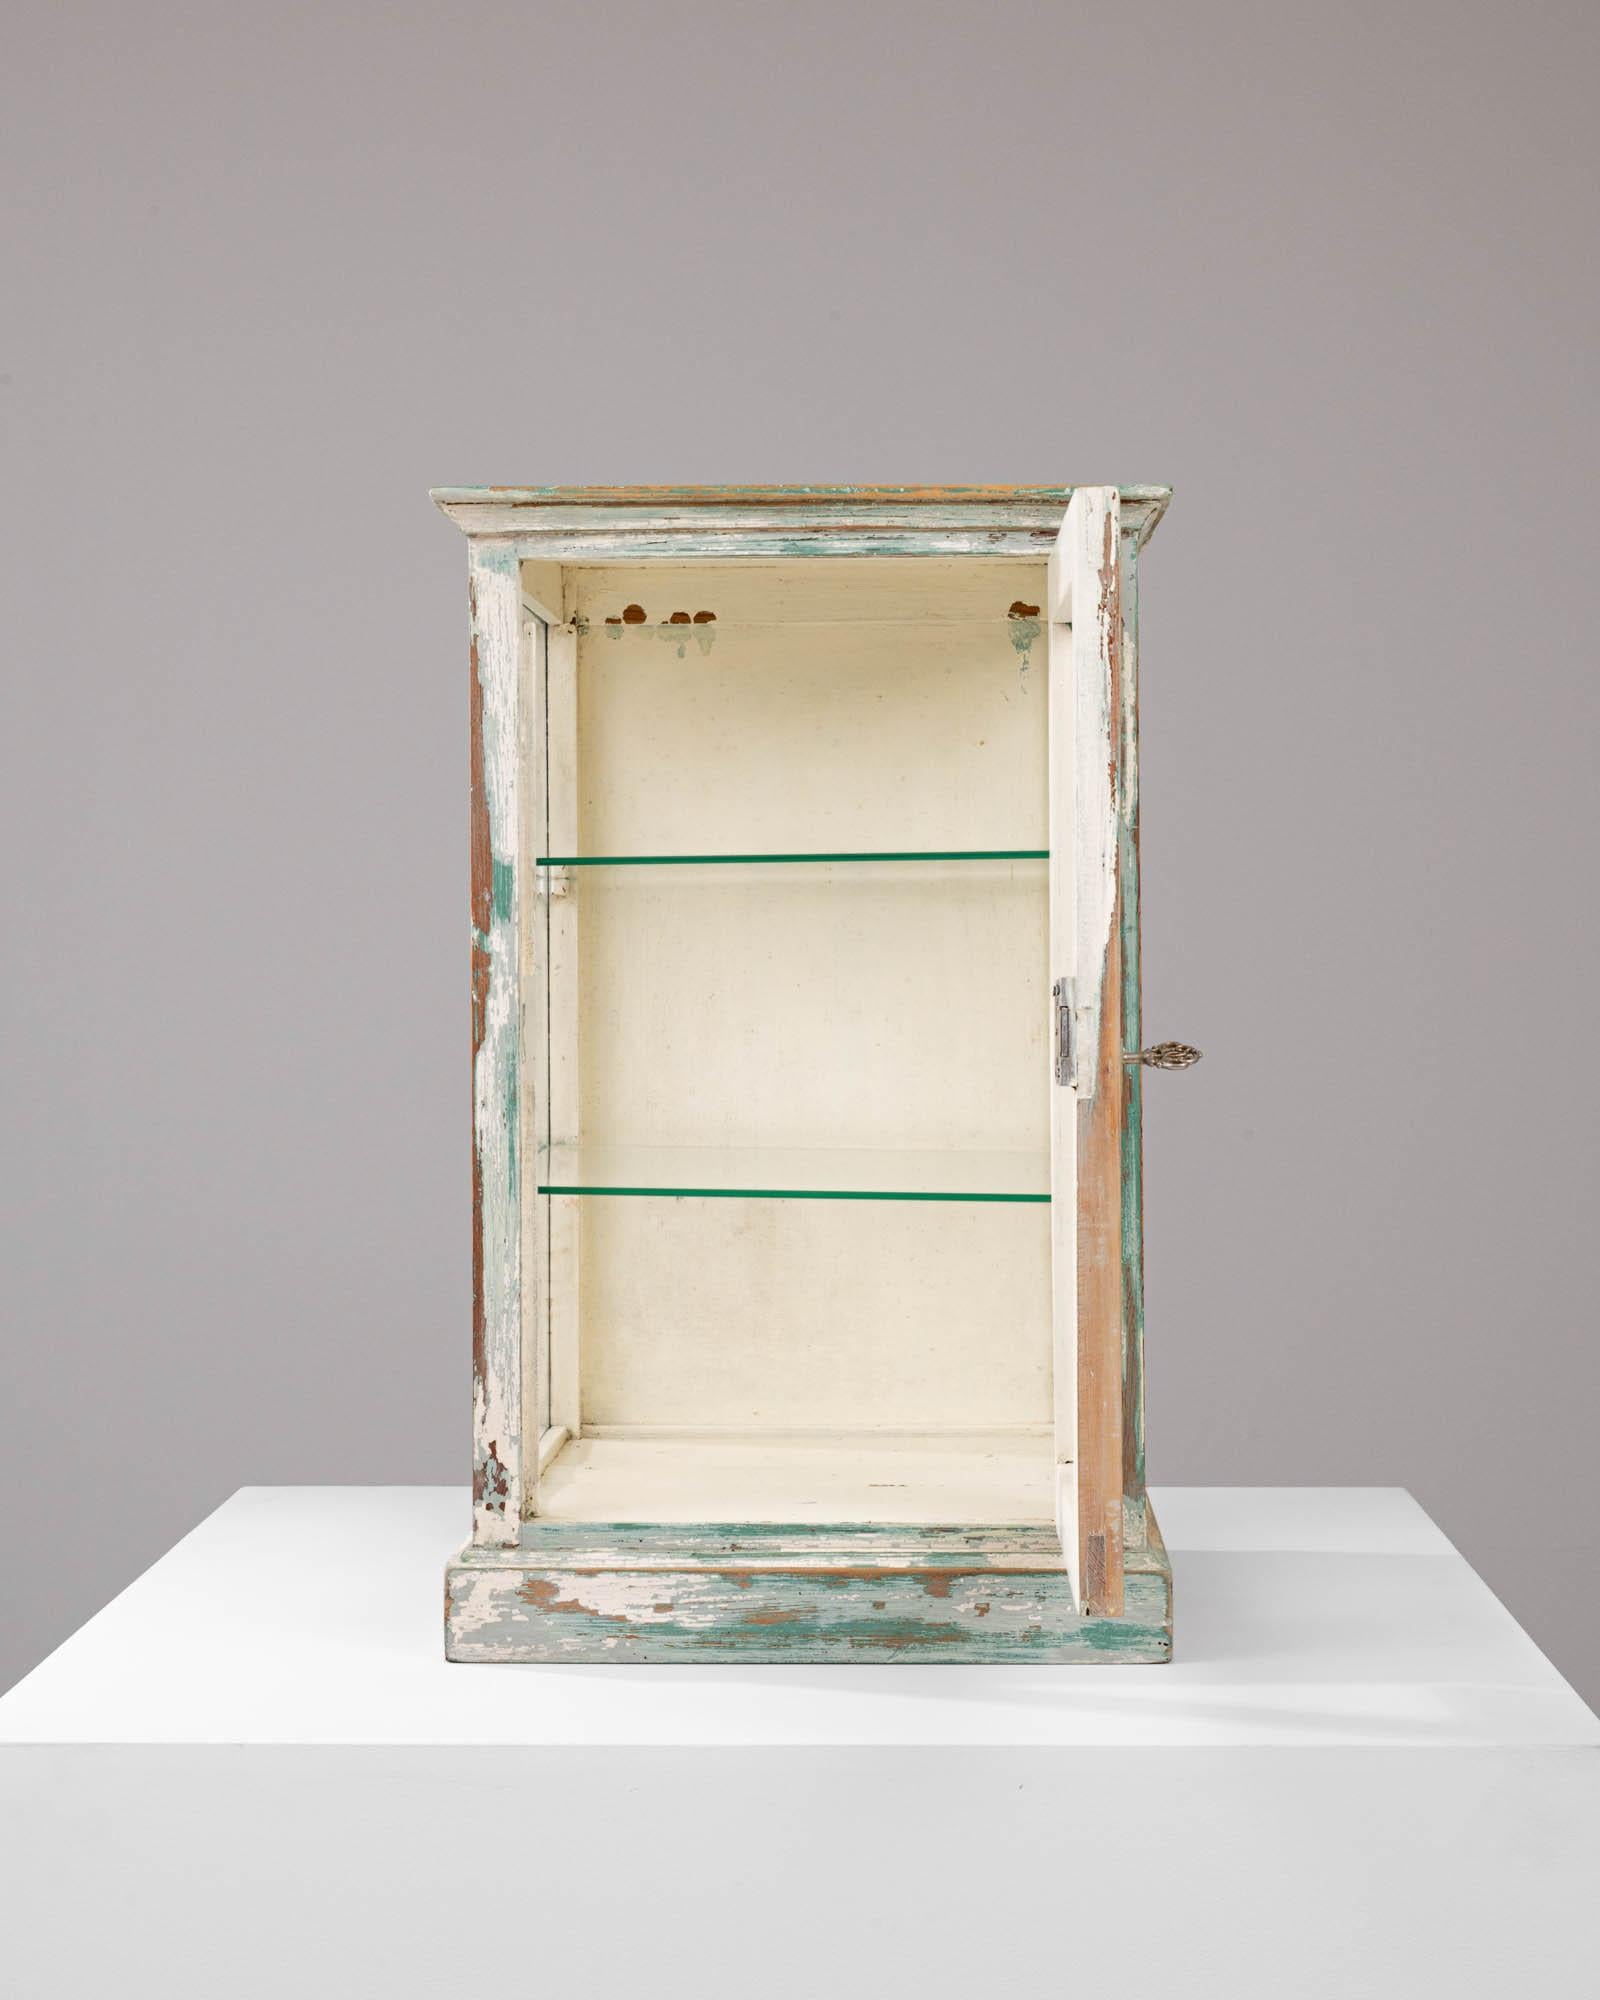 Step back in time with this charming 1900s French Wood White Patinated Small Vitrine, an enchanting piece that tells a story with its time-worn finish and delicate details. With its softly weathered white and seafoam green patina, this vitrine is a